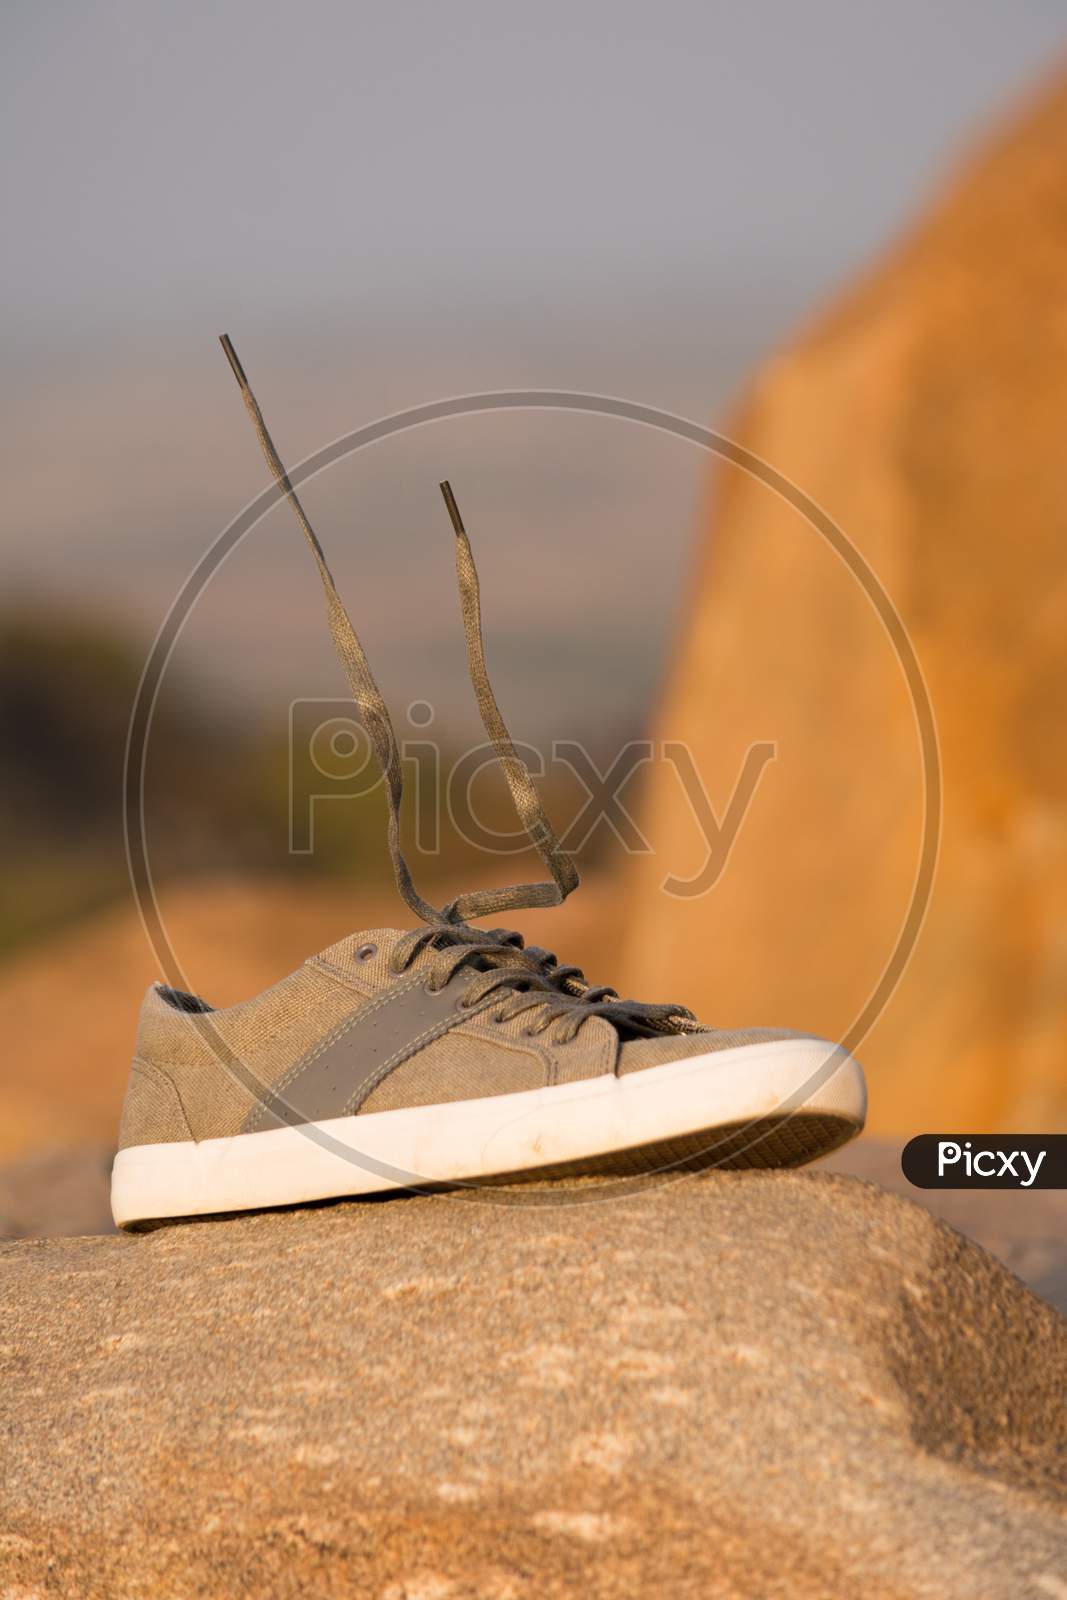 Stylish Men Olive Green Sneakers Or Regular Shoes On Top Of The Mountain With Levitating Shoelace